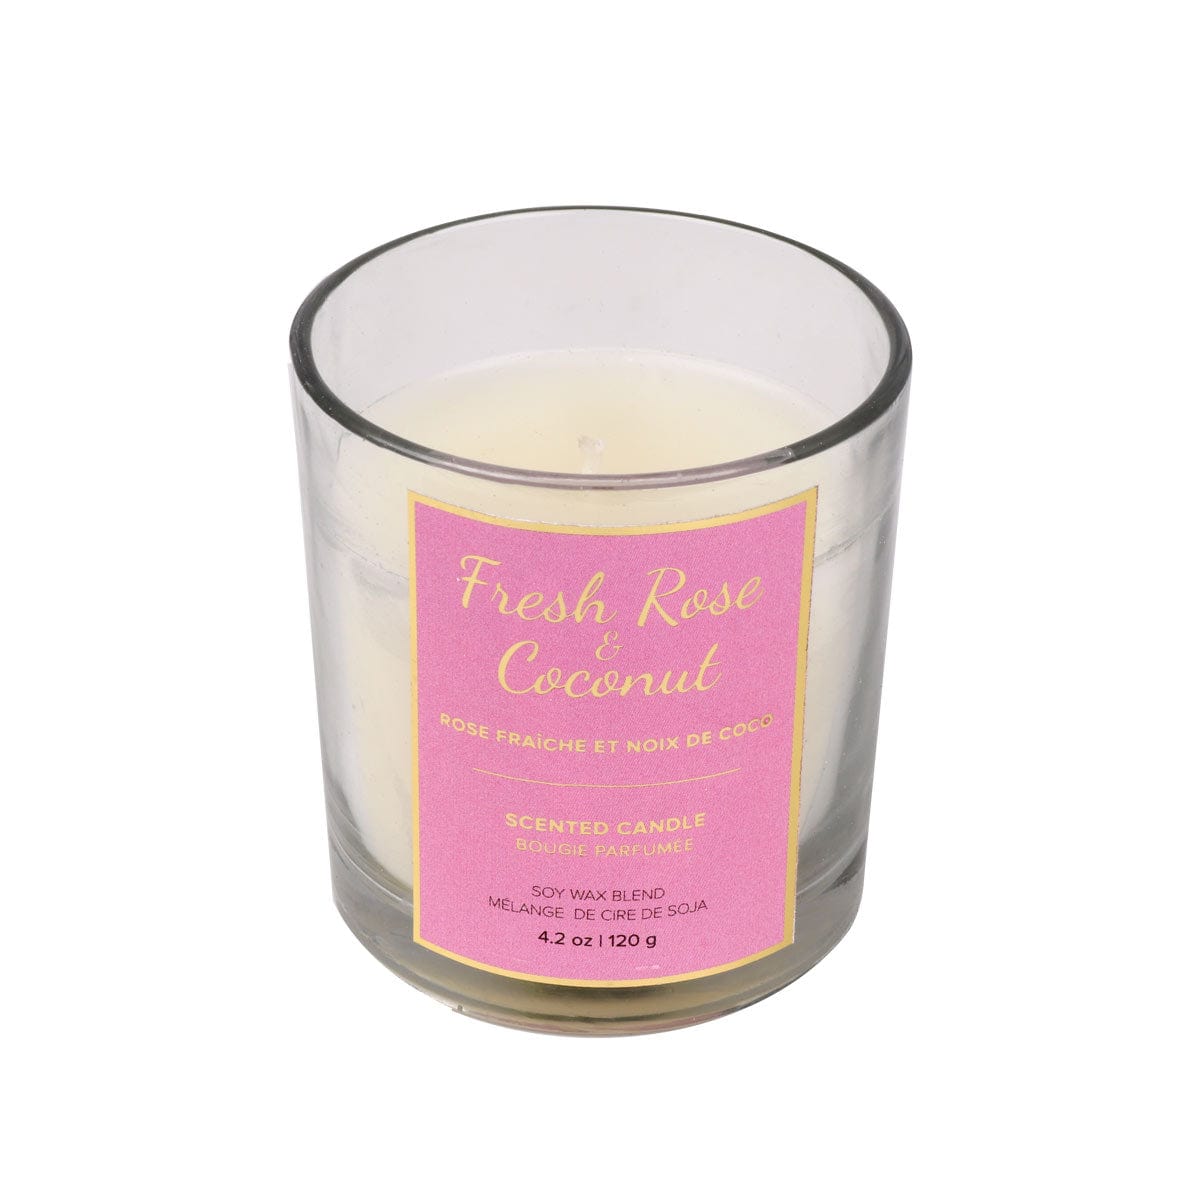 Wholesale Scented Candle, Boxed, Fresh Rose & Coconut